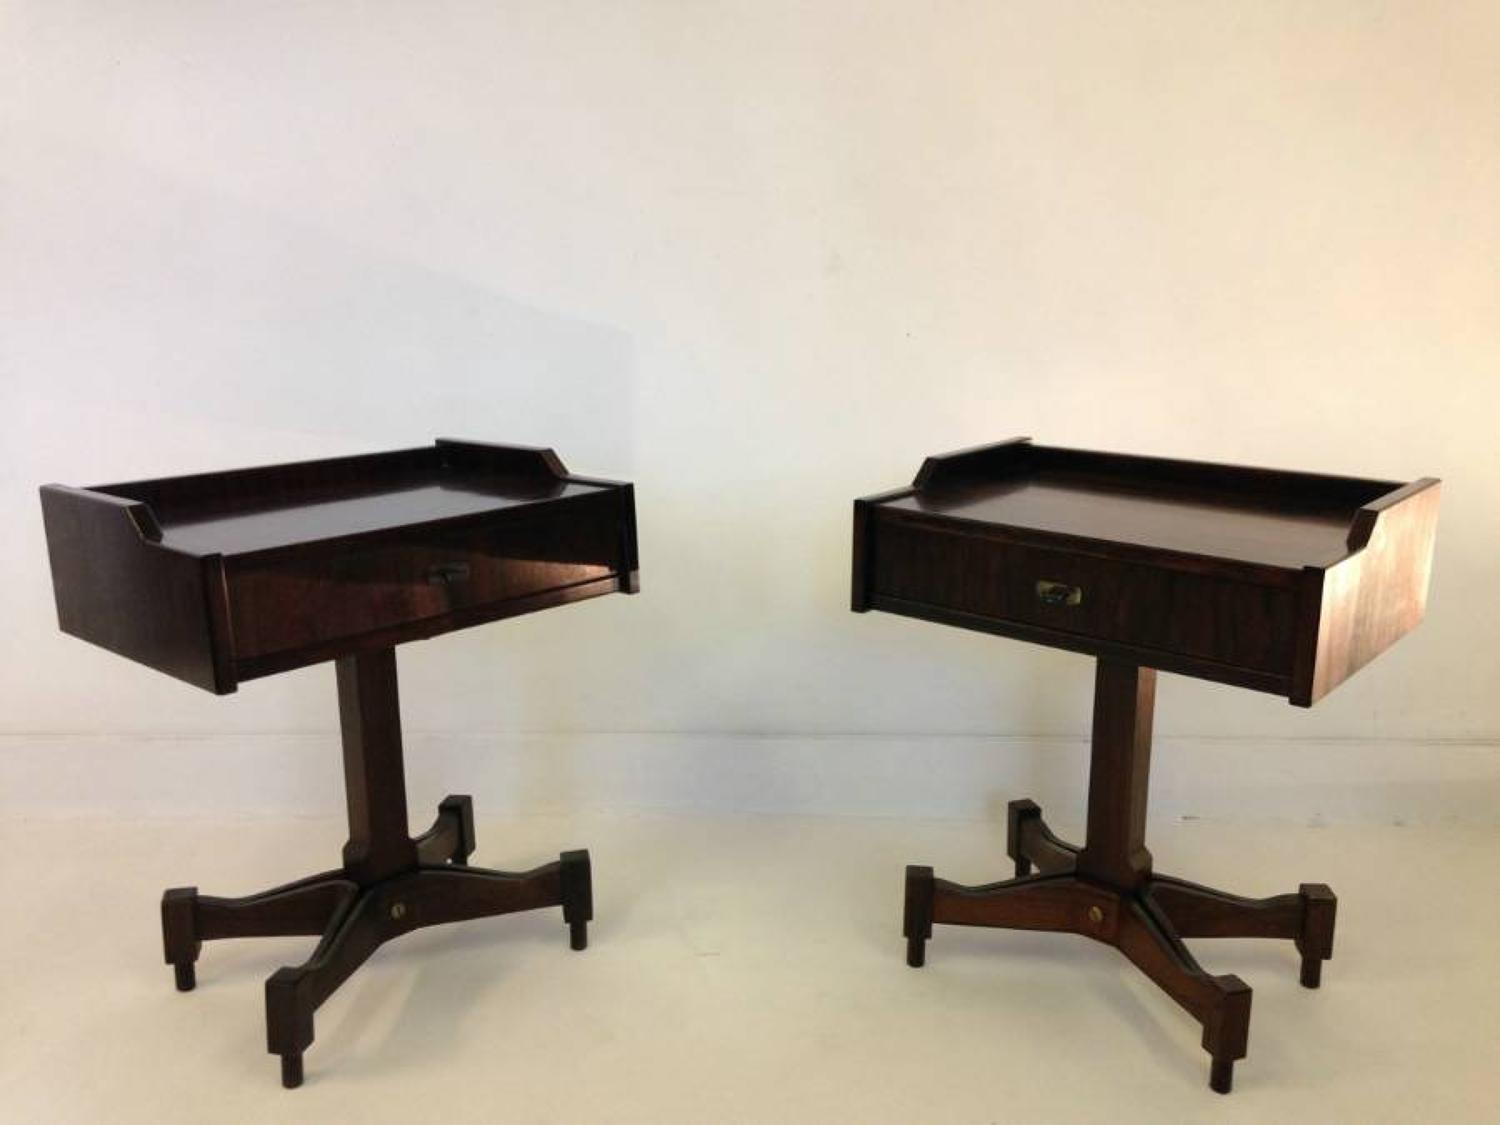 A pair of rosewood tables by Claudio Salocchi